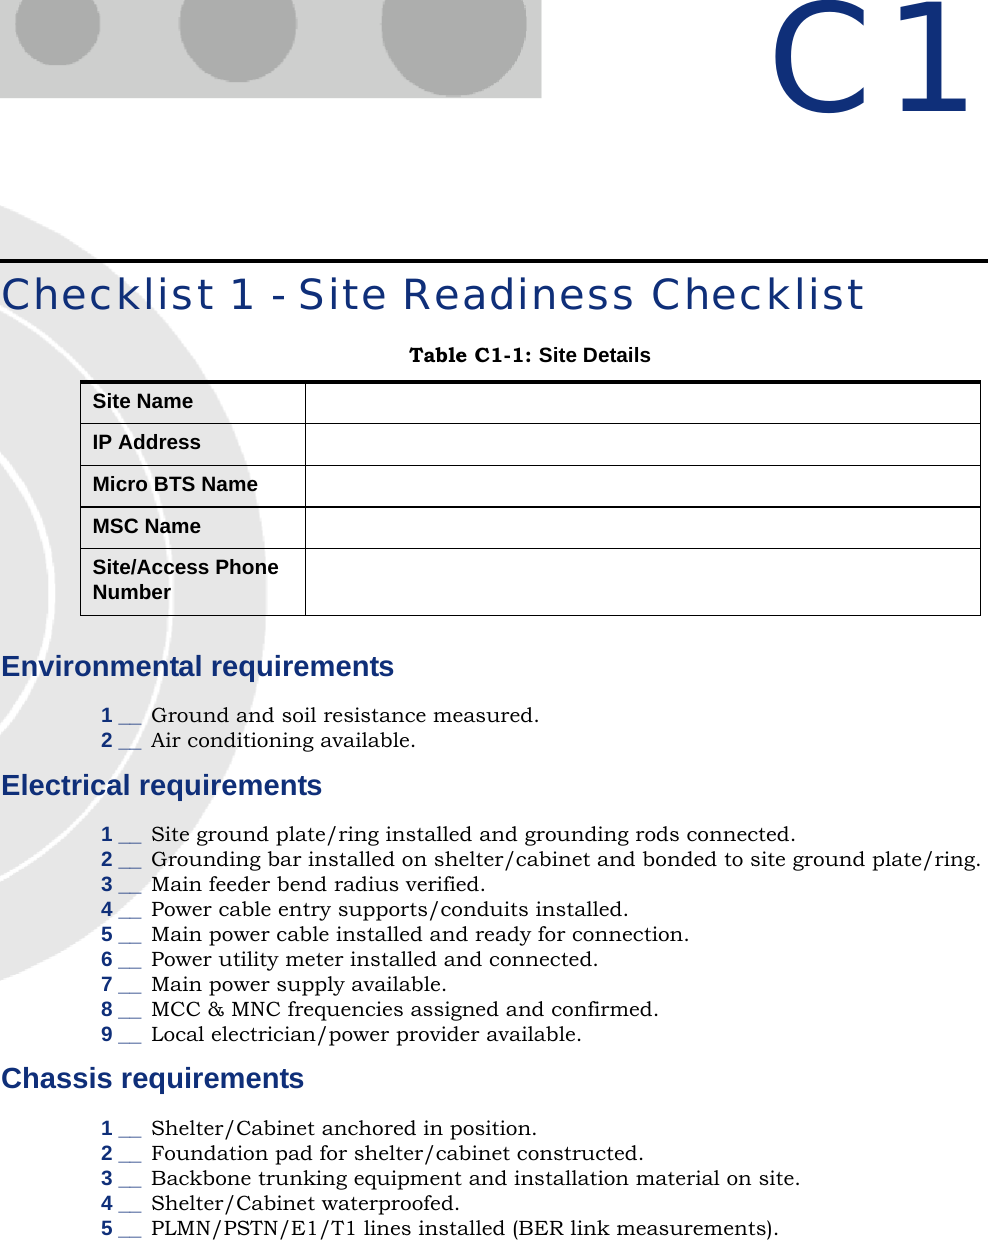 C1Checklist 1 - Site Readiness ChecklistEnvironmental requirements1 __ Ground and soil resistance measured.2 __ Air conditioning available.Electrical requirements1 __ Site ground plate/ring installed and grounding rods connected.2 __ Grounding bar installed on shelter/cabinet and bonded to site ground plate/ring.3 __ Main feeder bend radius verified.4 __ Power cable entry supports/conduits installed.5 __ Main power cable installed and ready for connection.6 __ Power utility meter installed and connected.7 __ Main power supply available.8 __ MCC &amp; MNC frequencies assigned and confirmed.9 __ Local electrician/power provider available.Chassis requirements1 __ Shelter/Cabinet anchored in position.2 __ Foundation pad for shelter/cabinet constructed.3 __ Backbone trunking equipment and installation material on site.4 __ Shelter/Cabinet waterproofed.5 __ PLMN/PSTN/E1/T1 lines installed (BER link measurements).Table C1-1: Site DetailsSite NameIP AddressMicro BTS NameMSC NameSite/Access Phone Number